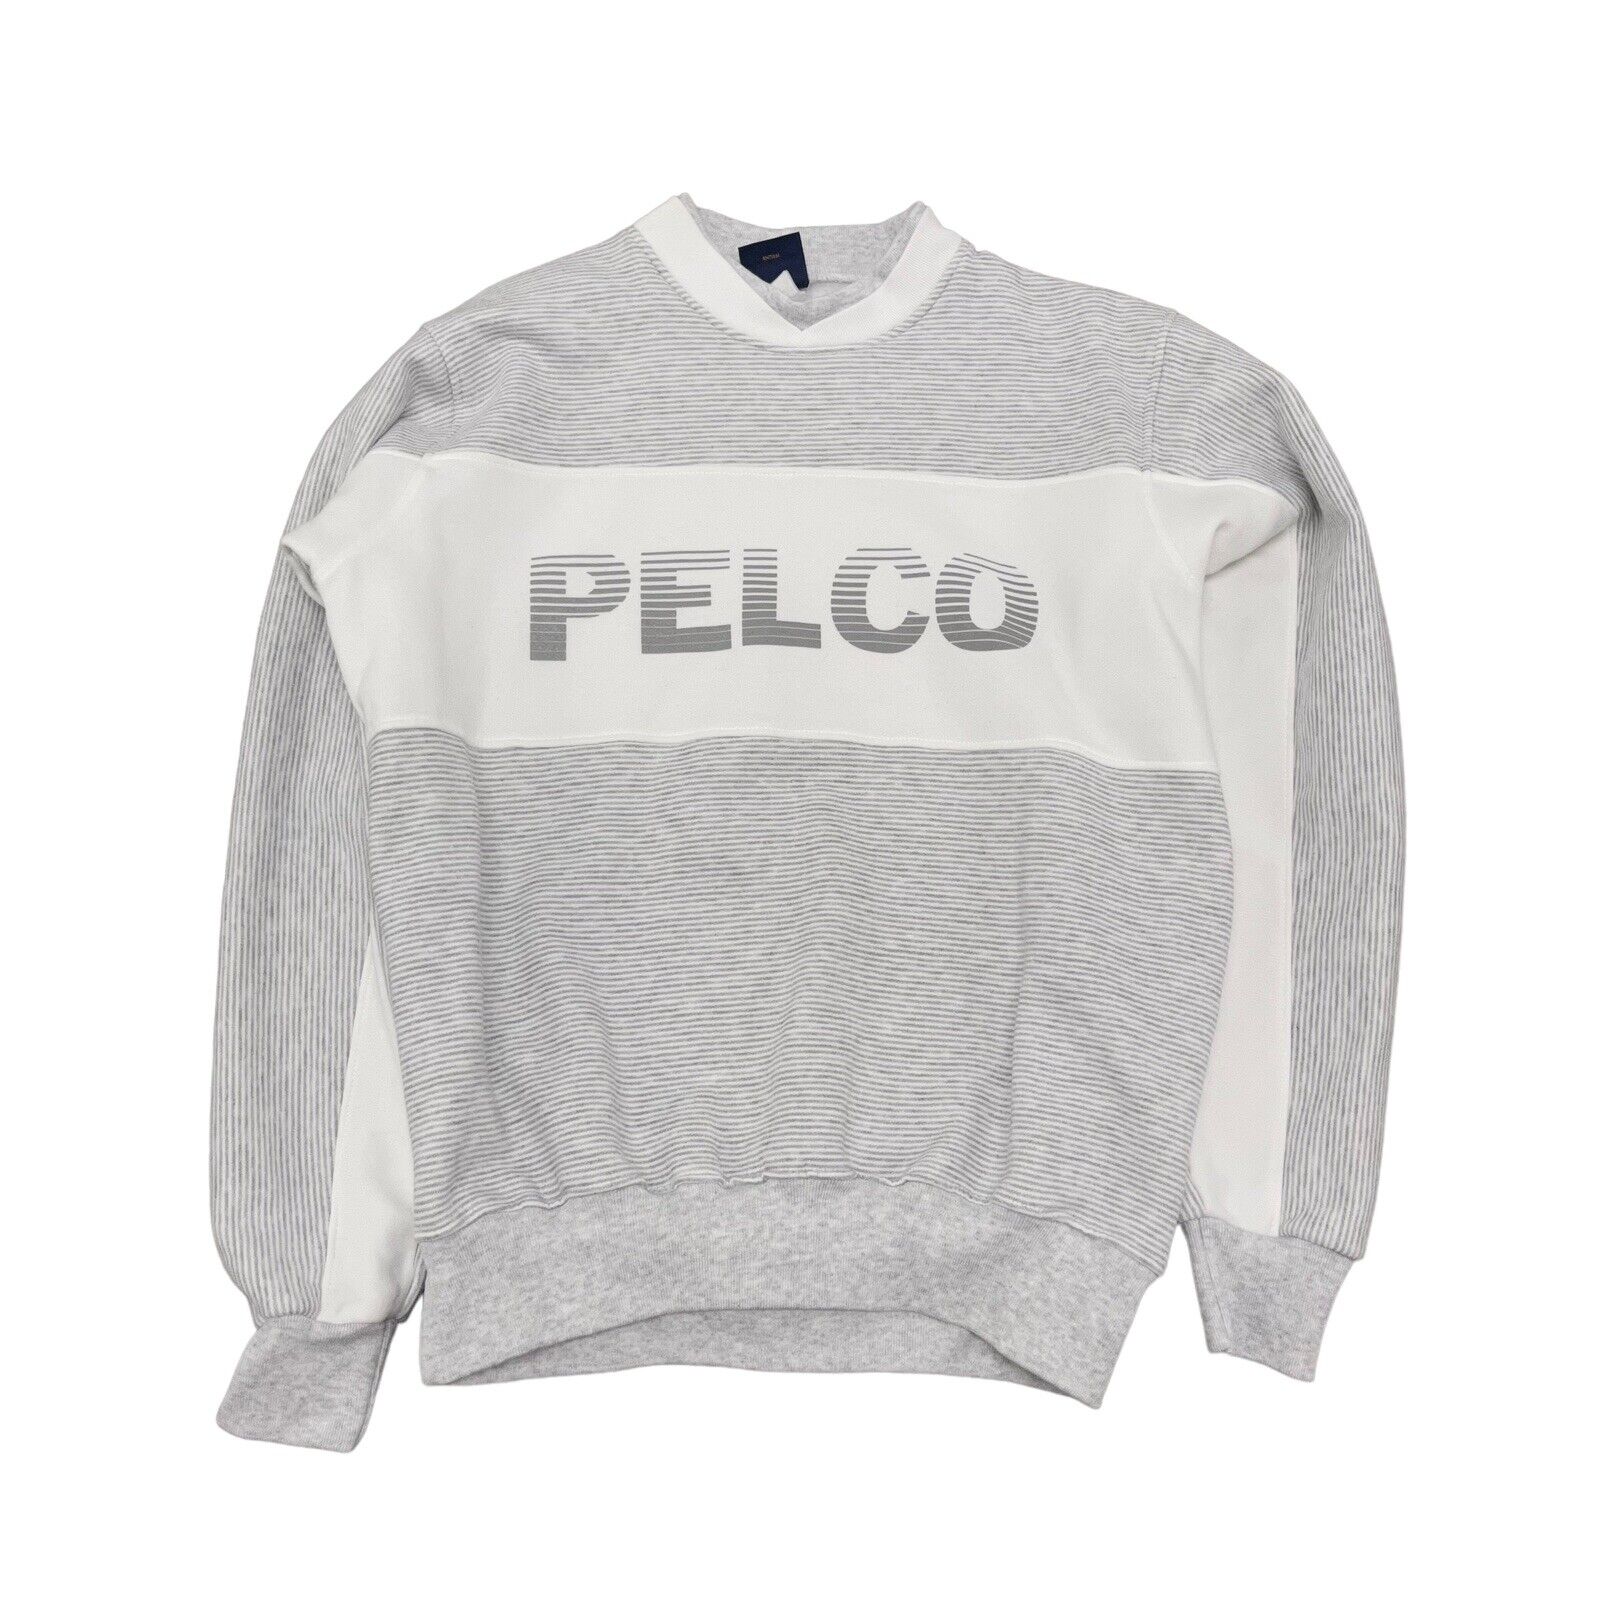 90s Pelco Products Sweatshirt Mens M/L Striped Gray Spellout | eBay